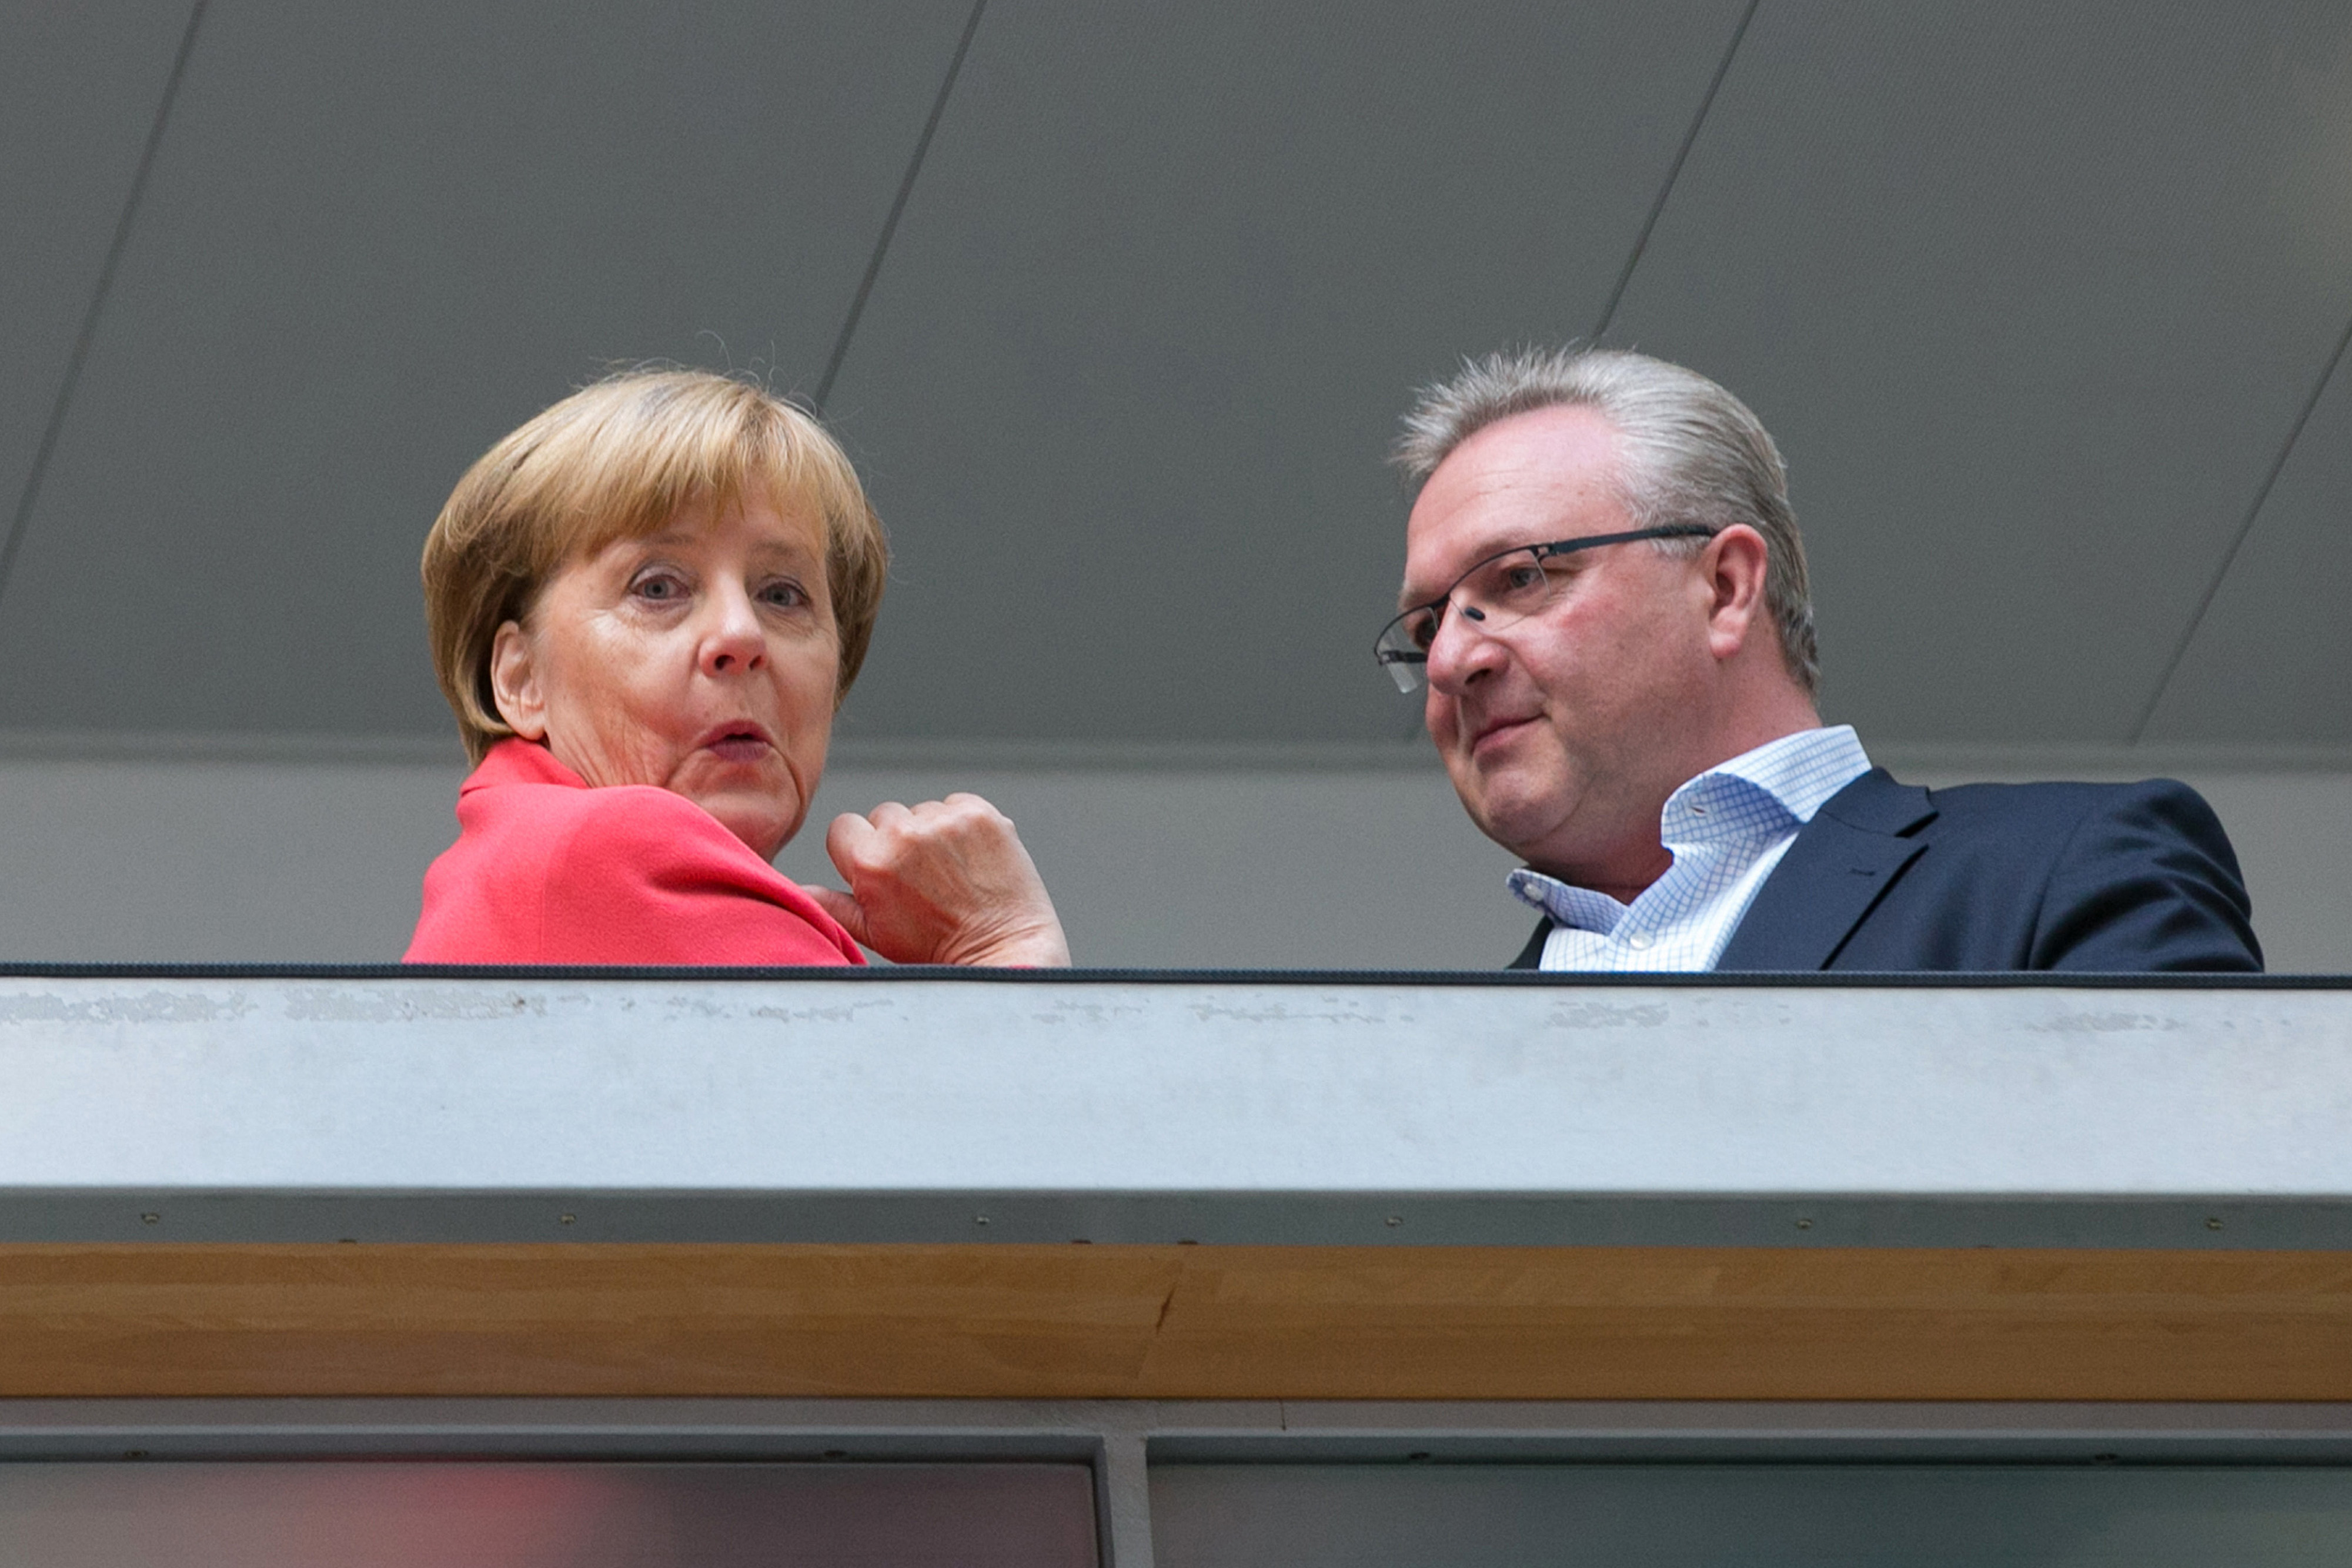 Angela Merkel, Germany's chancellor and Christian Democratic Union (CDU) party leader, left, reacts as she stands with Frank Henkel, the CDU candidate in Berlin, ahead of a CDU federal board meeting at the party's headquarters in Berlin, Germany, on Monday, Sept. 19, 2016. (Krisztian Bocsi—Bloomberg/Getty Images)